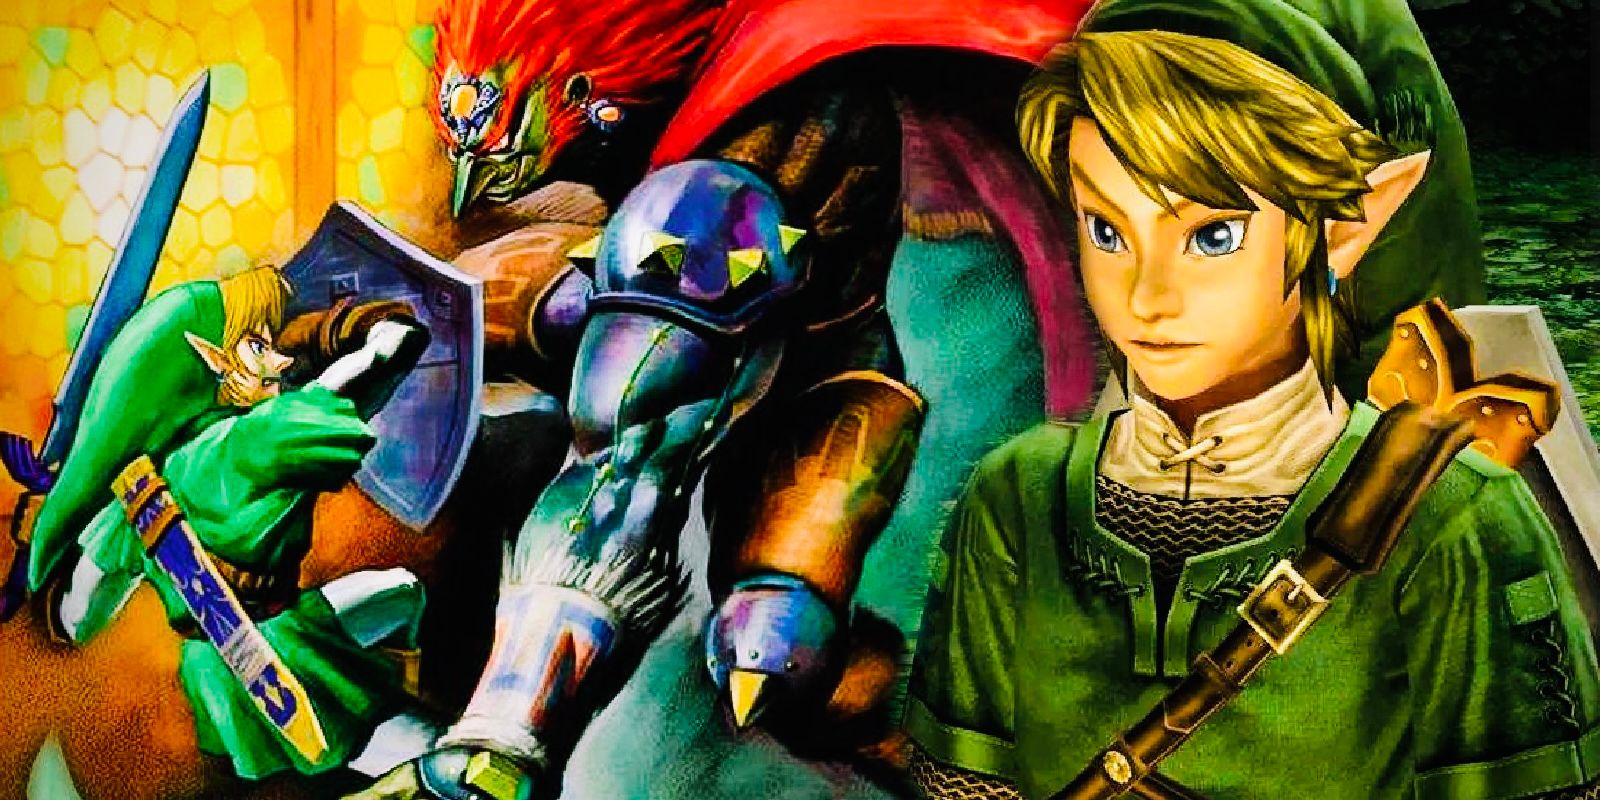 Link in the Legend of Zelda ocarina of time fighting ganondorf while twilight Princess Link looks on